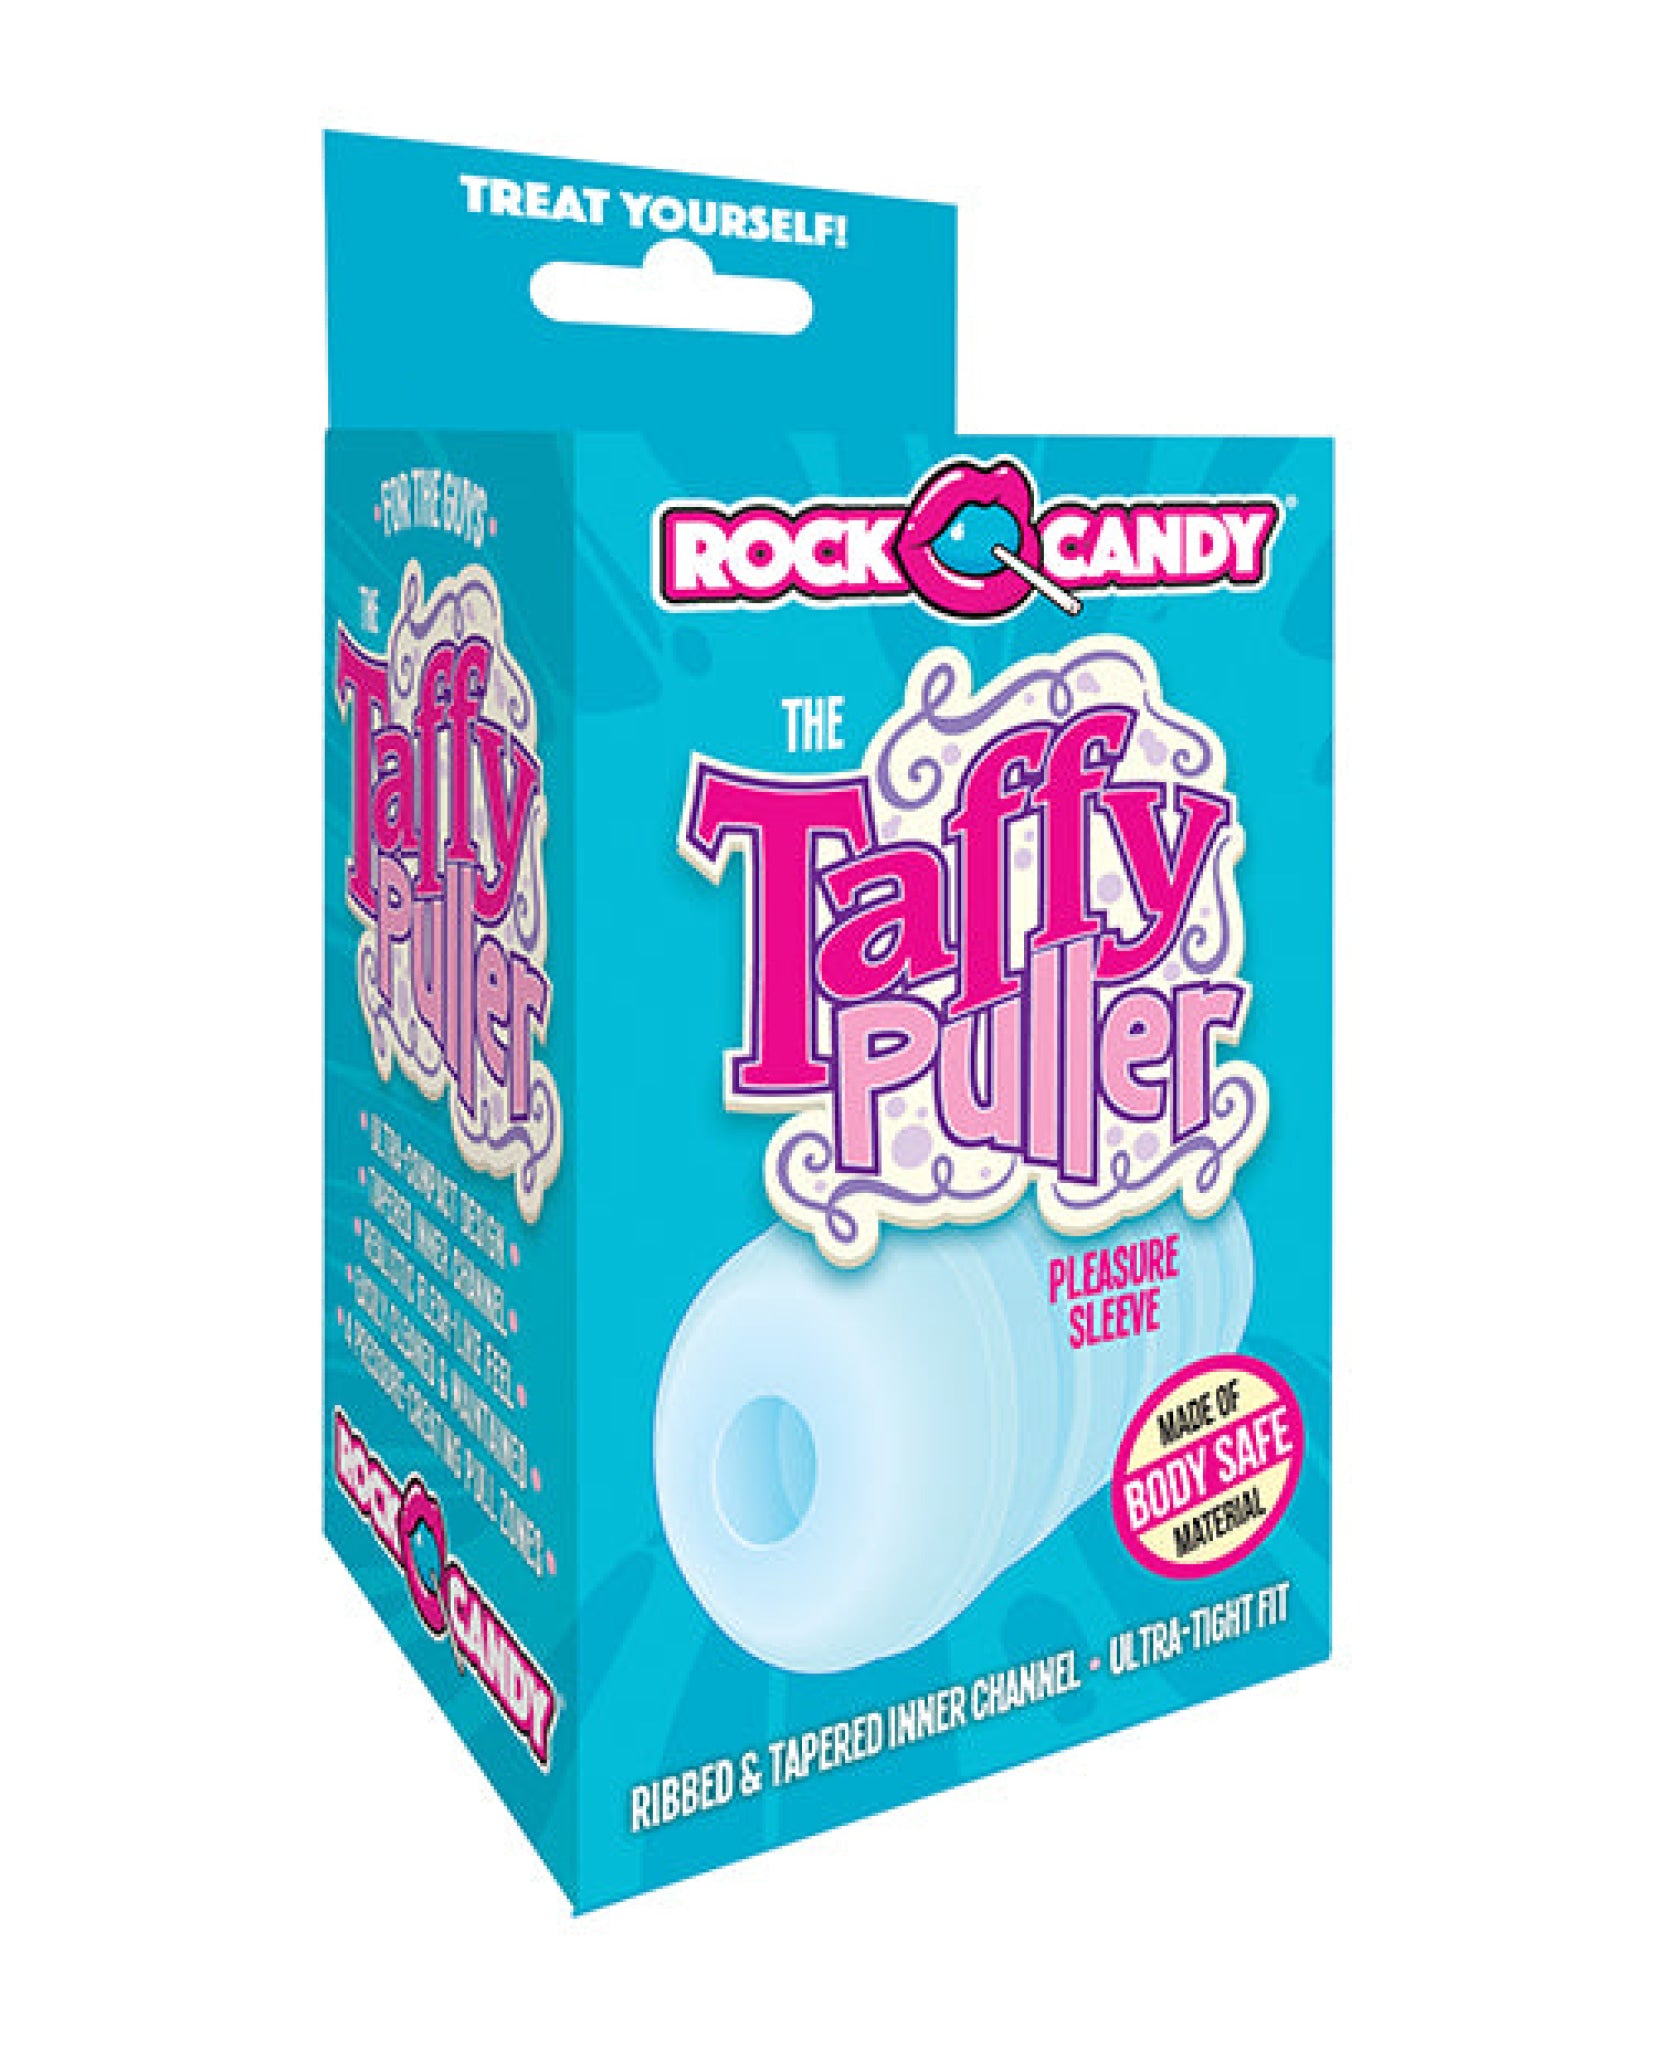 Rock Candy The Taffy Puller Pleasure Sleeve - Blue Rock Candy